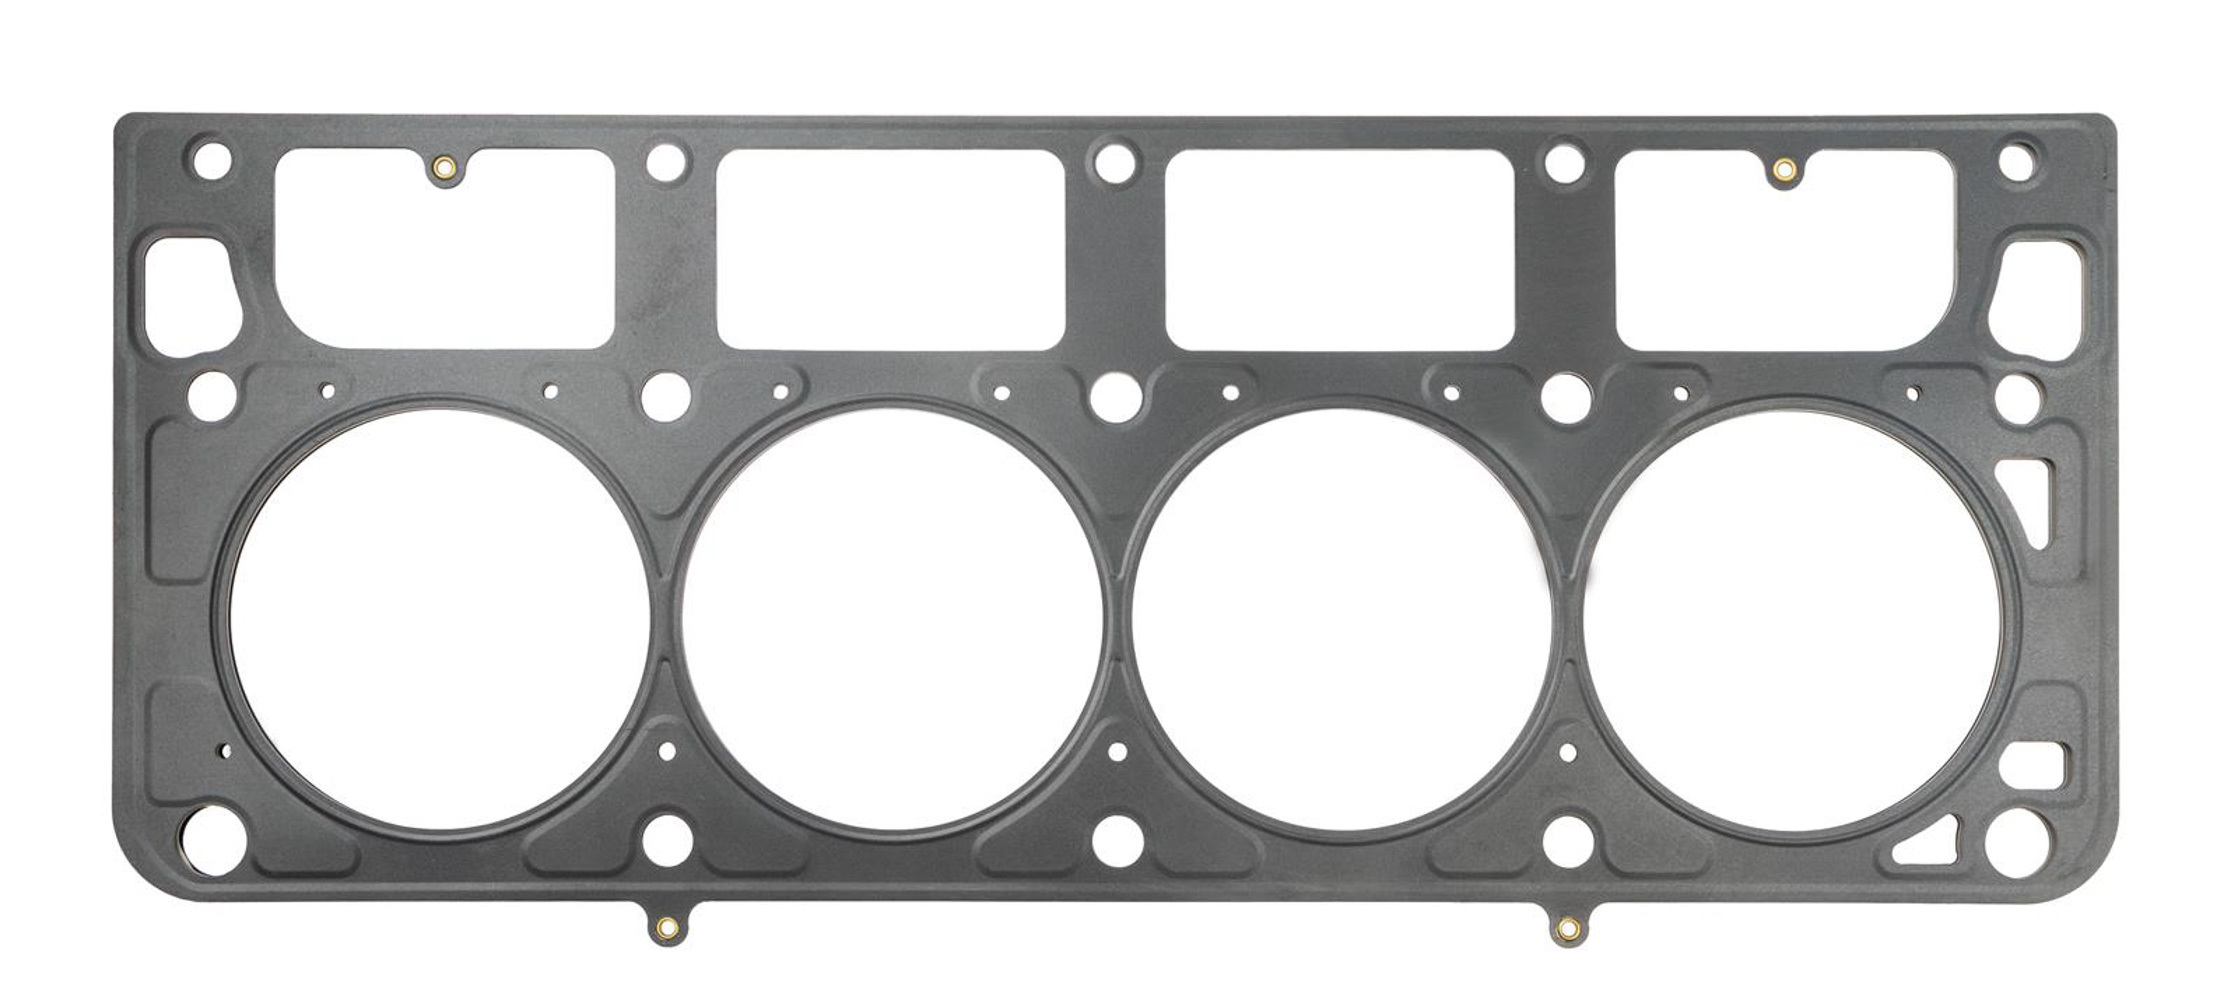 SCE Gaskets M209451 - Cylinder Head Gasket, MLS Spartan, 3.945 in Bore, 0.051 in Compression Thickness, Multi-Layer Steel, GM LS-Series, Each